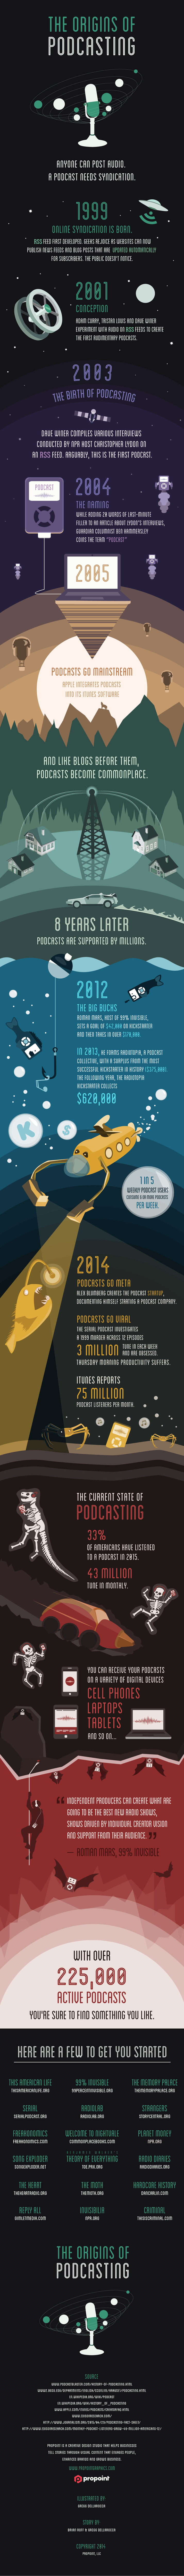 birth of podcasting -infographic